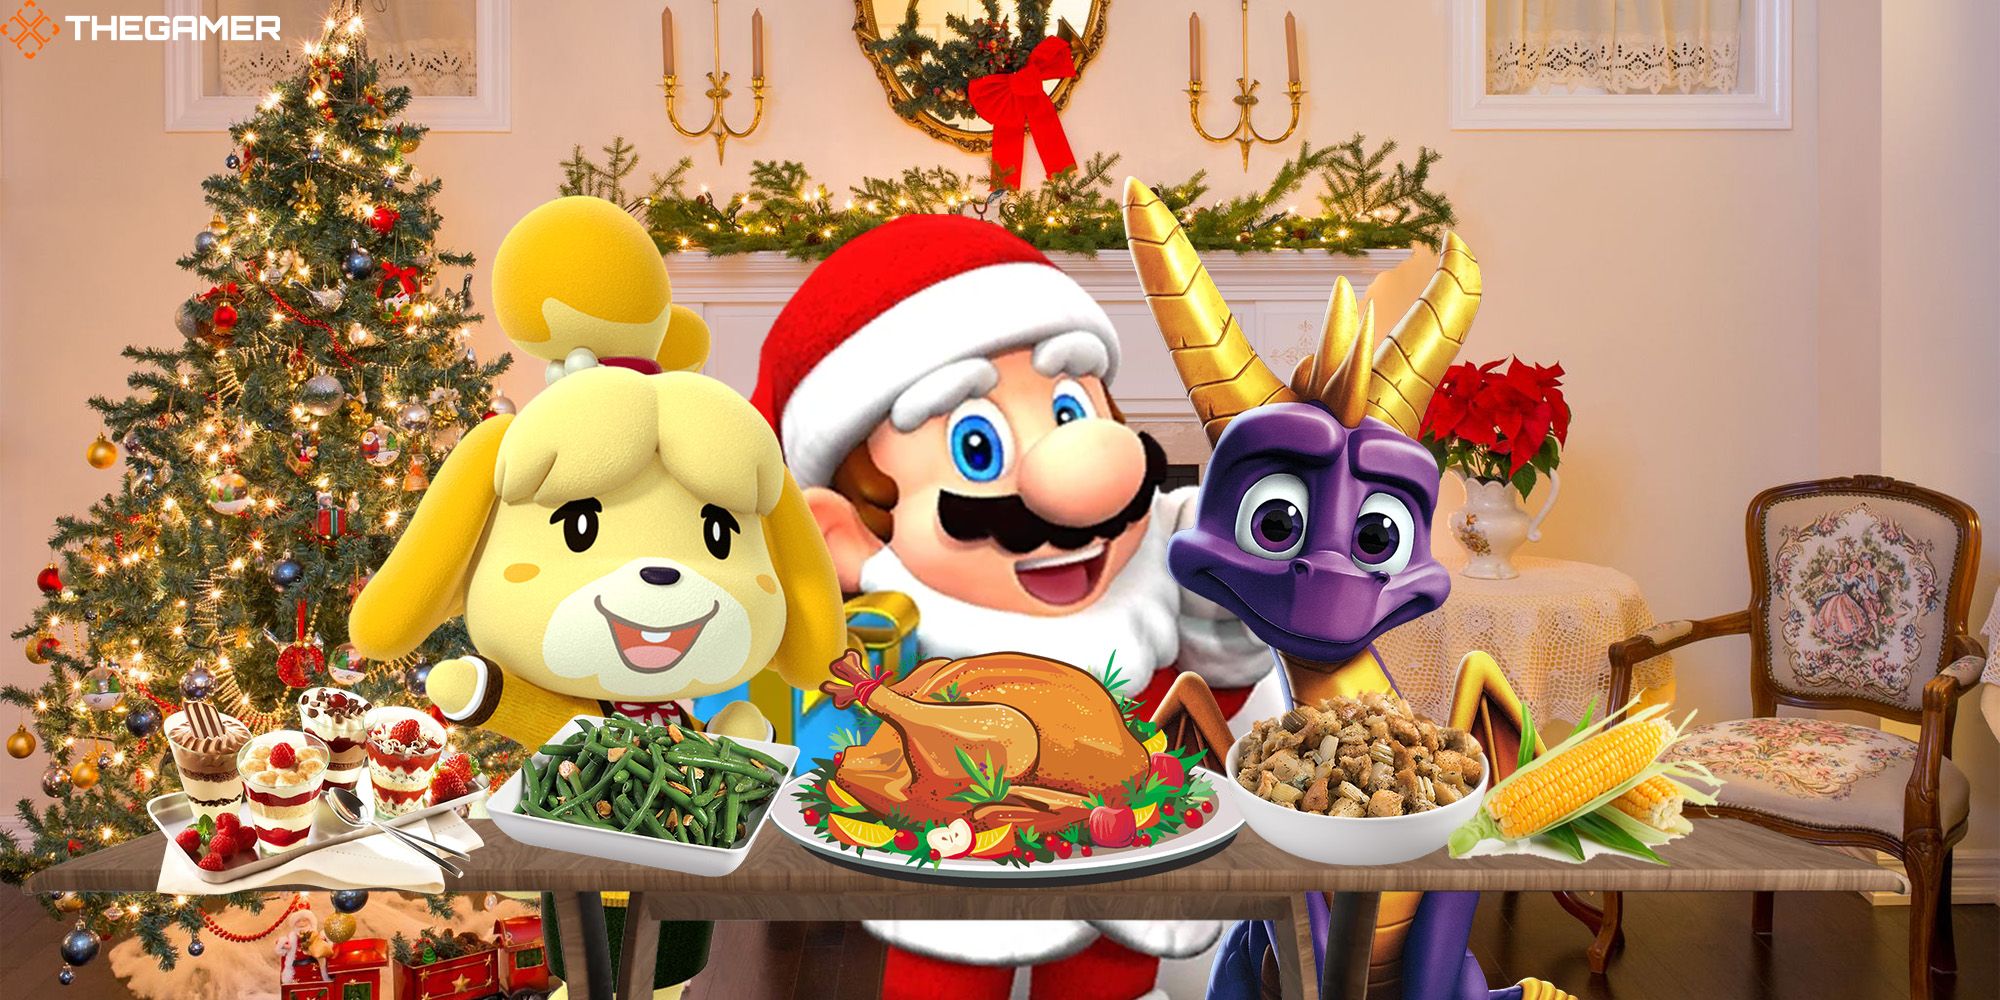 Isabelle, Spyro, and a Santa-suited Mario gather around a dining table stacked with food in a warmly decorated living room. Custom image for TG.